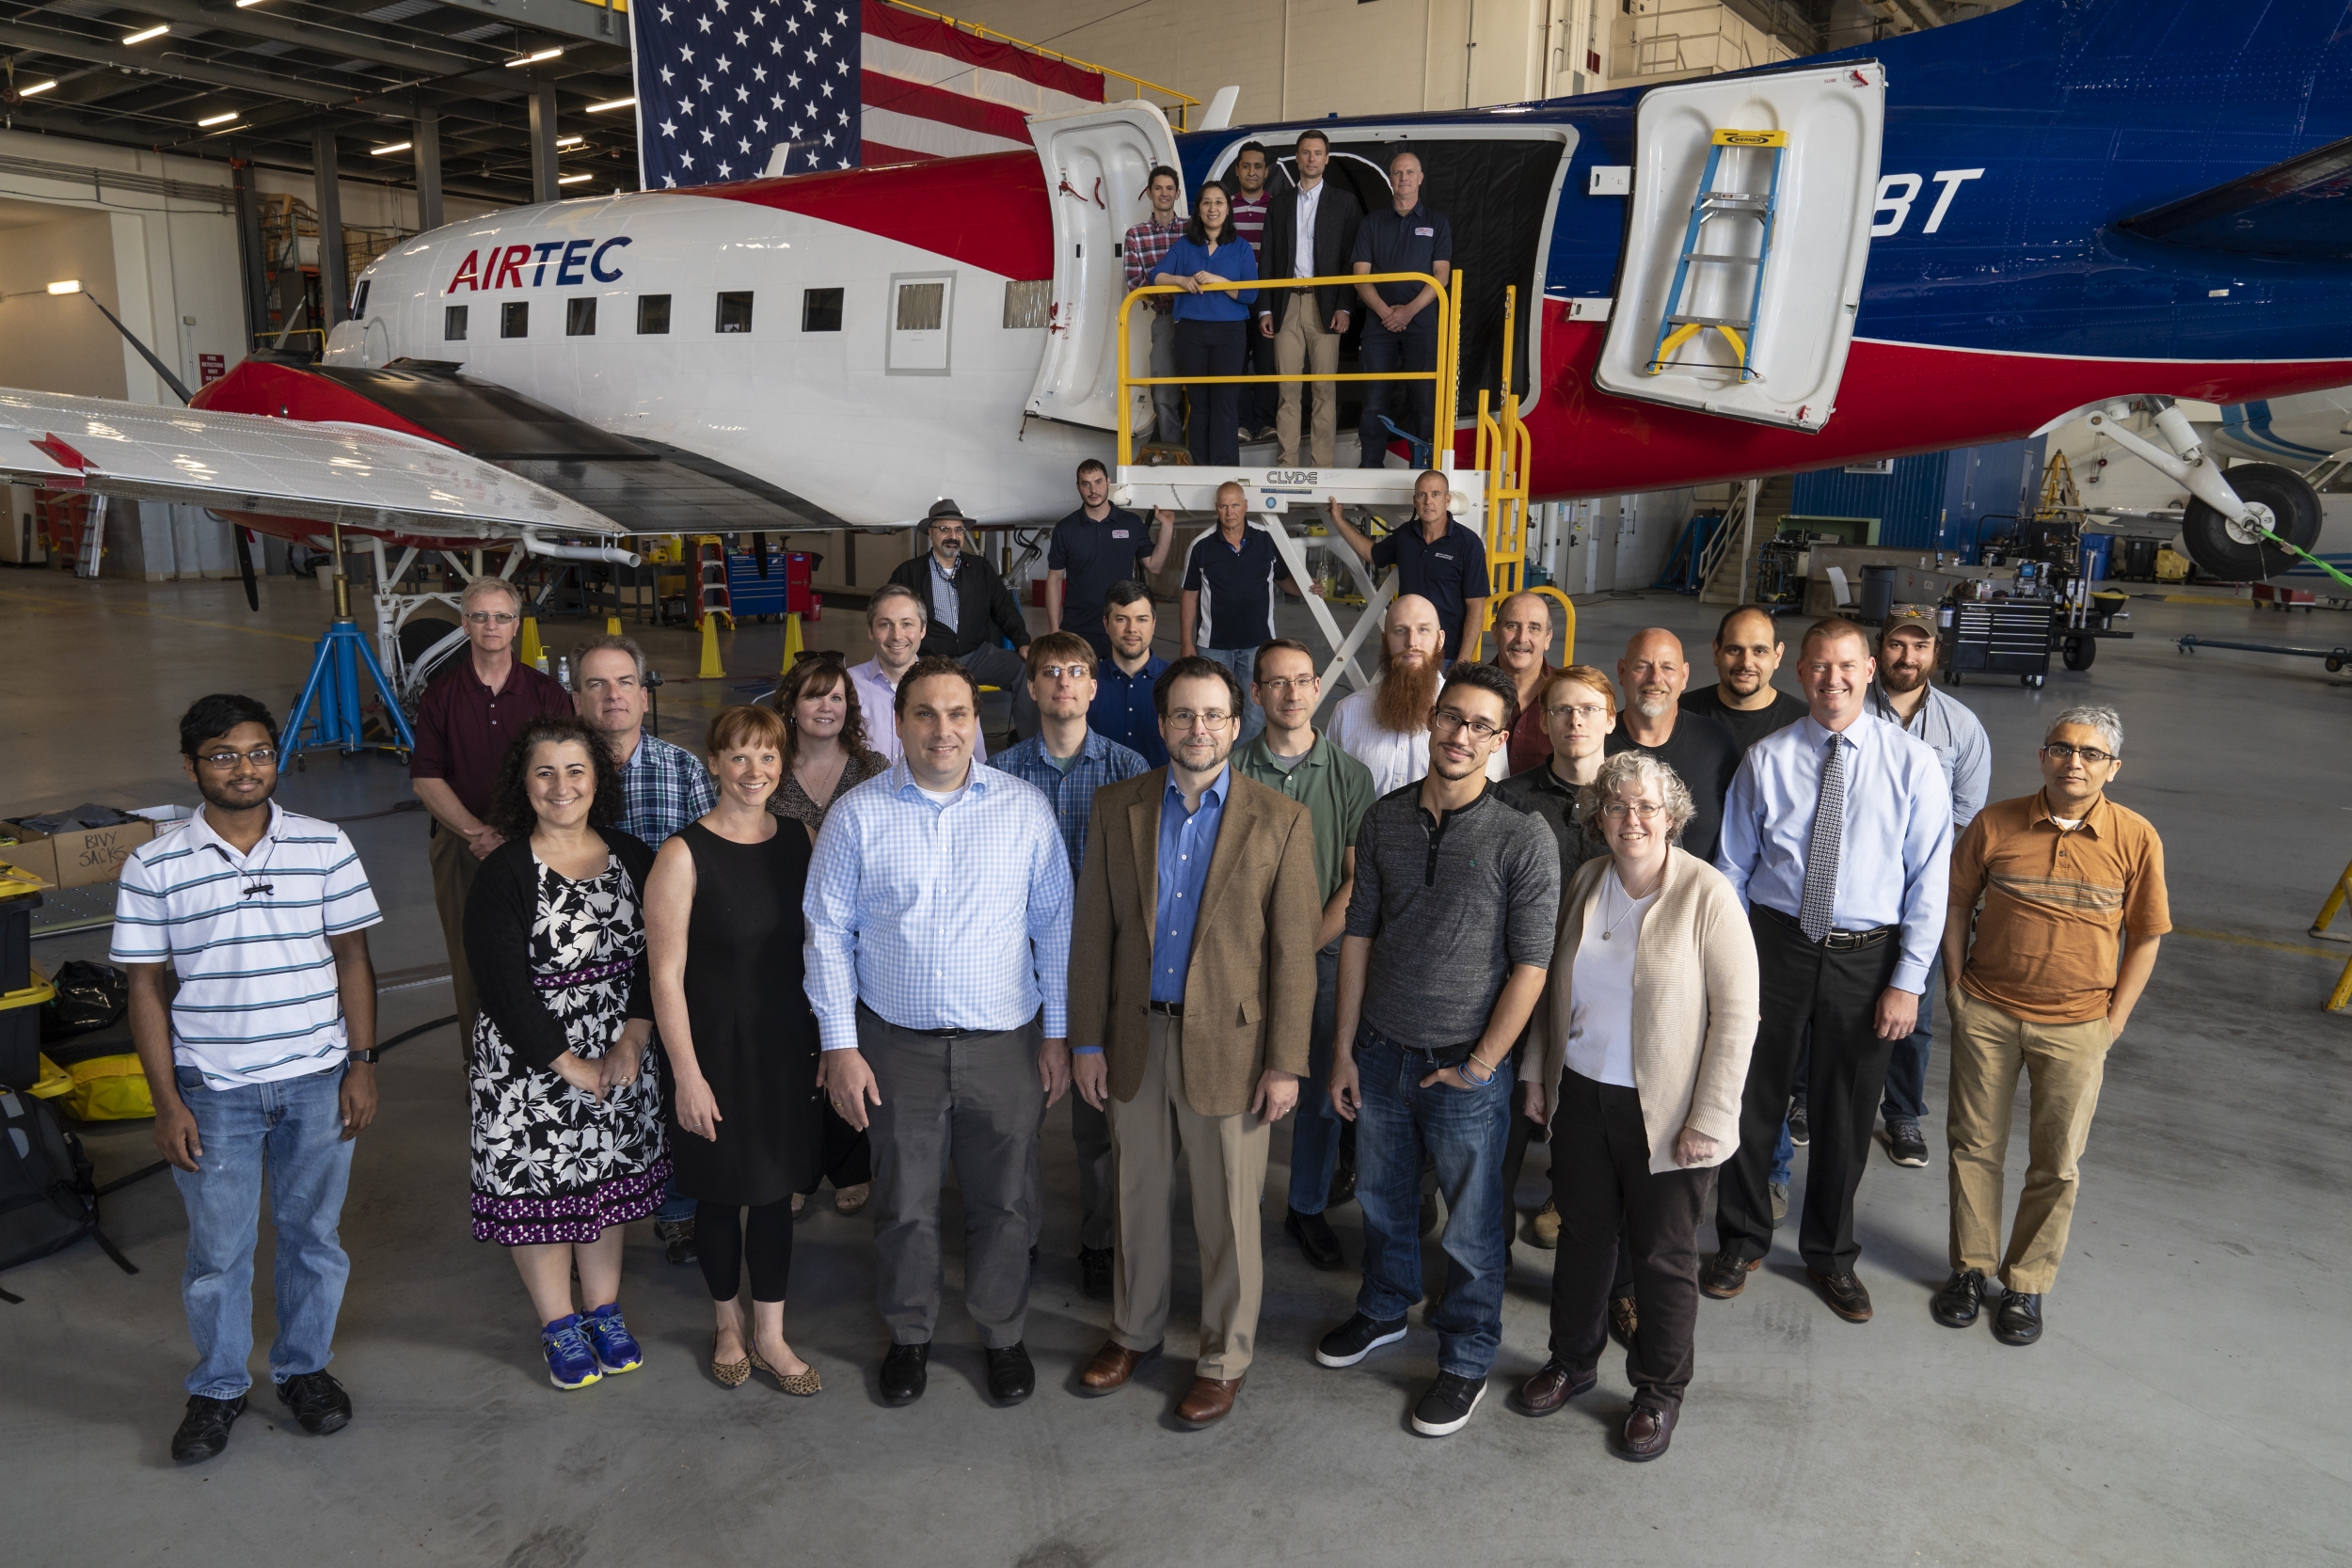 A group of about 30 people pose in front of an airplane